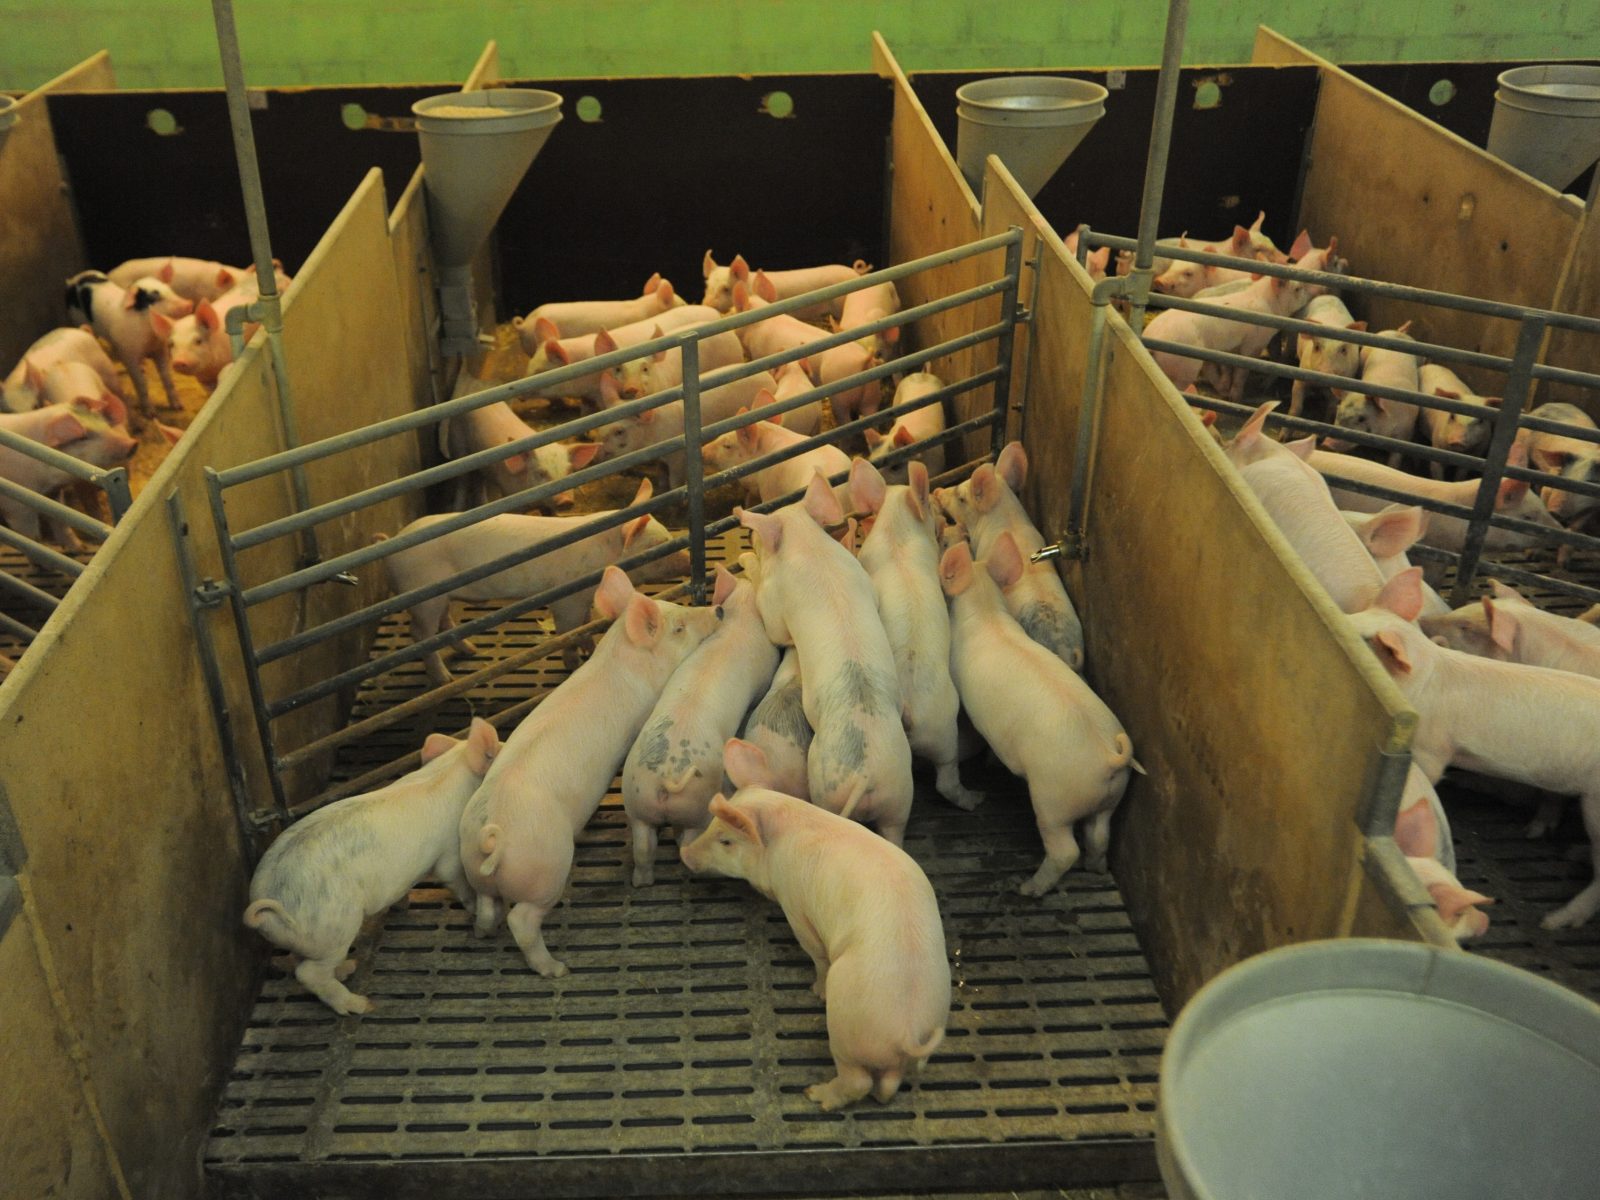 Young pigs crowd pens in Swedish factory farms